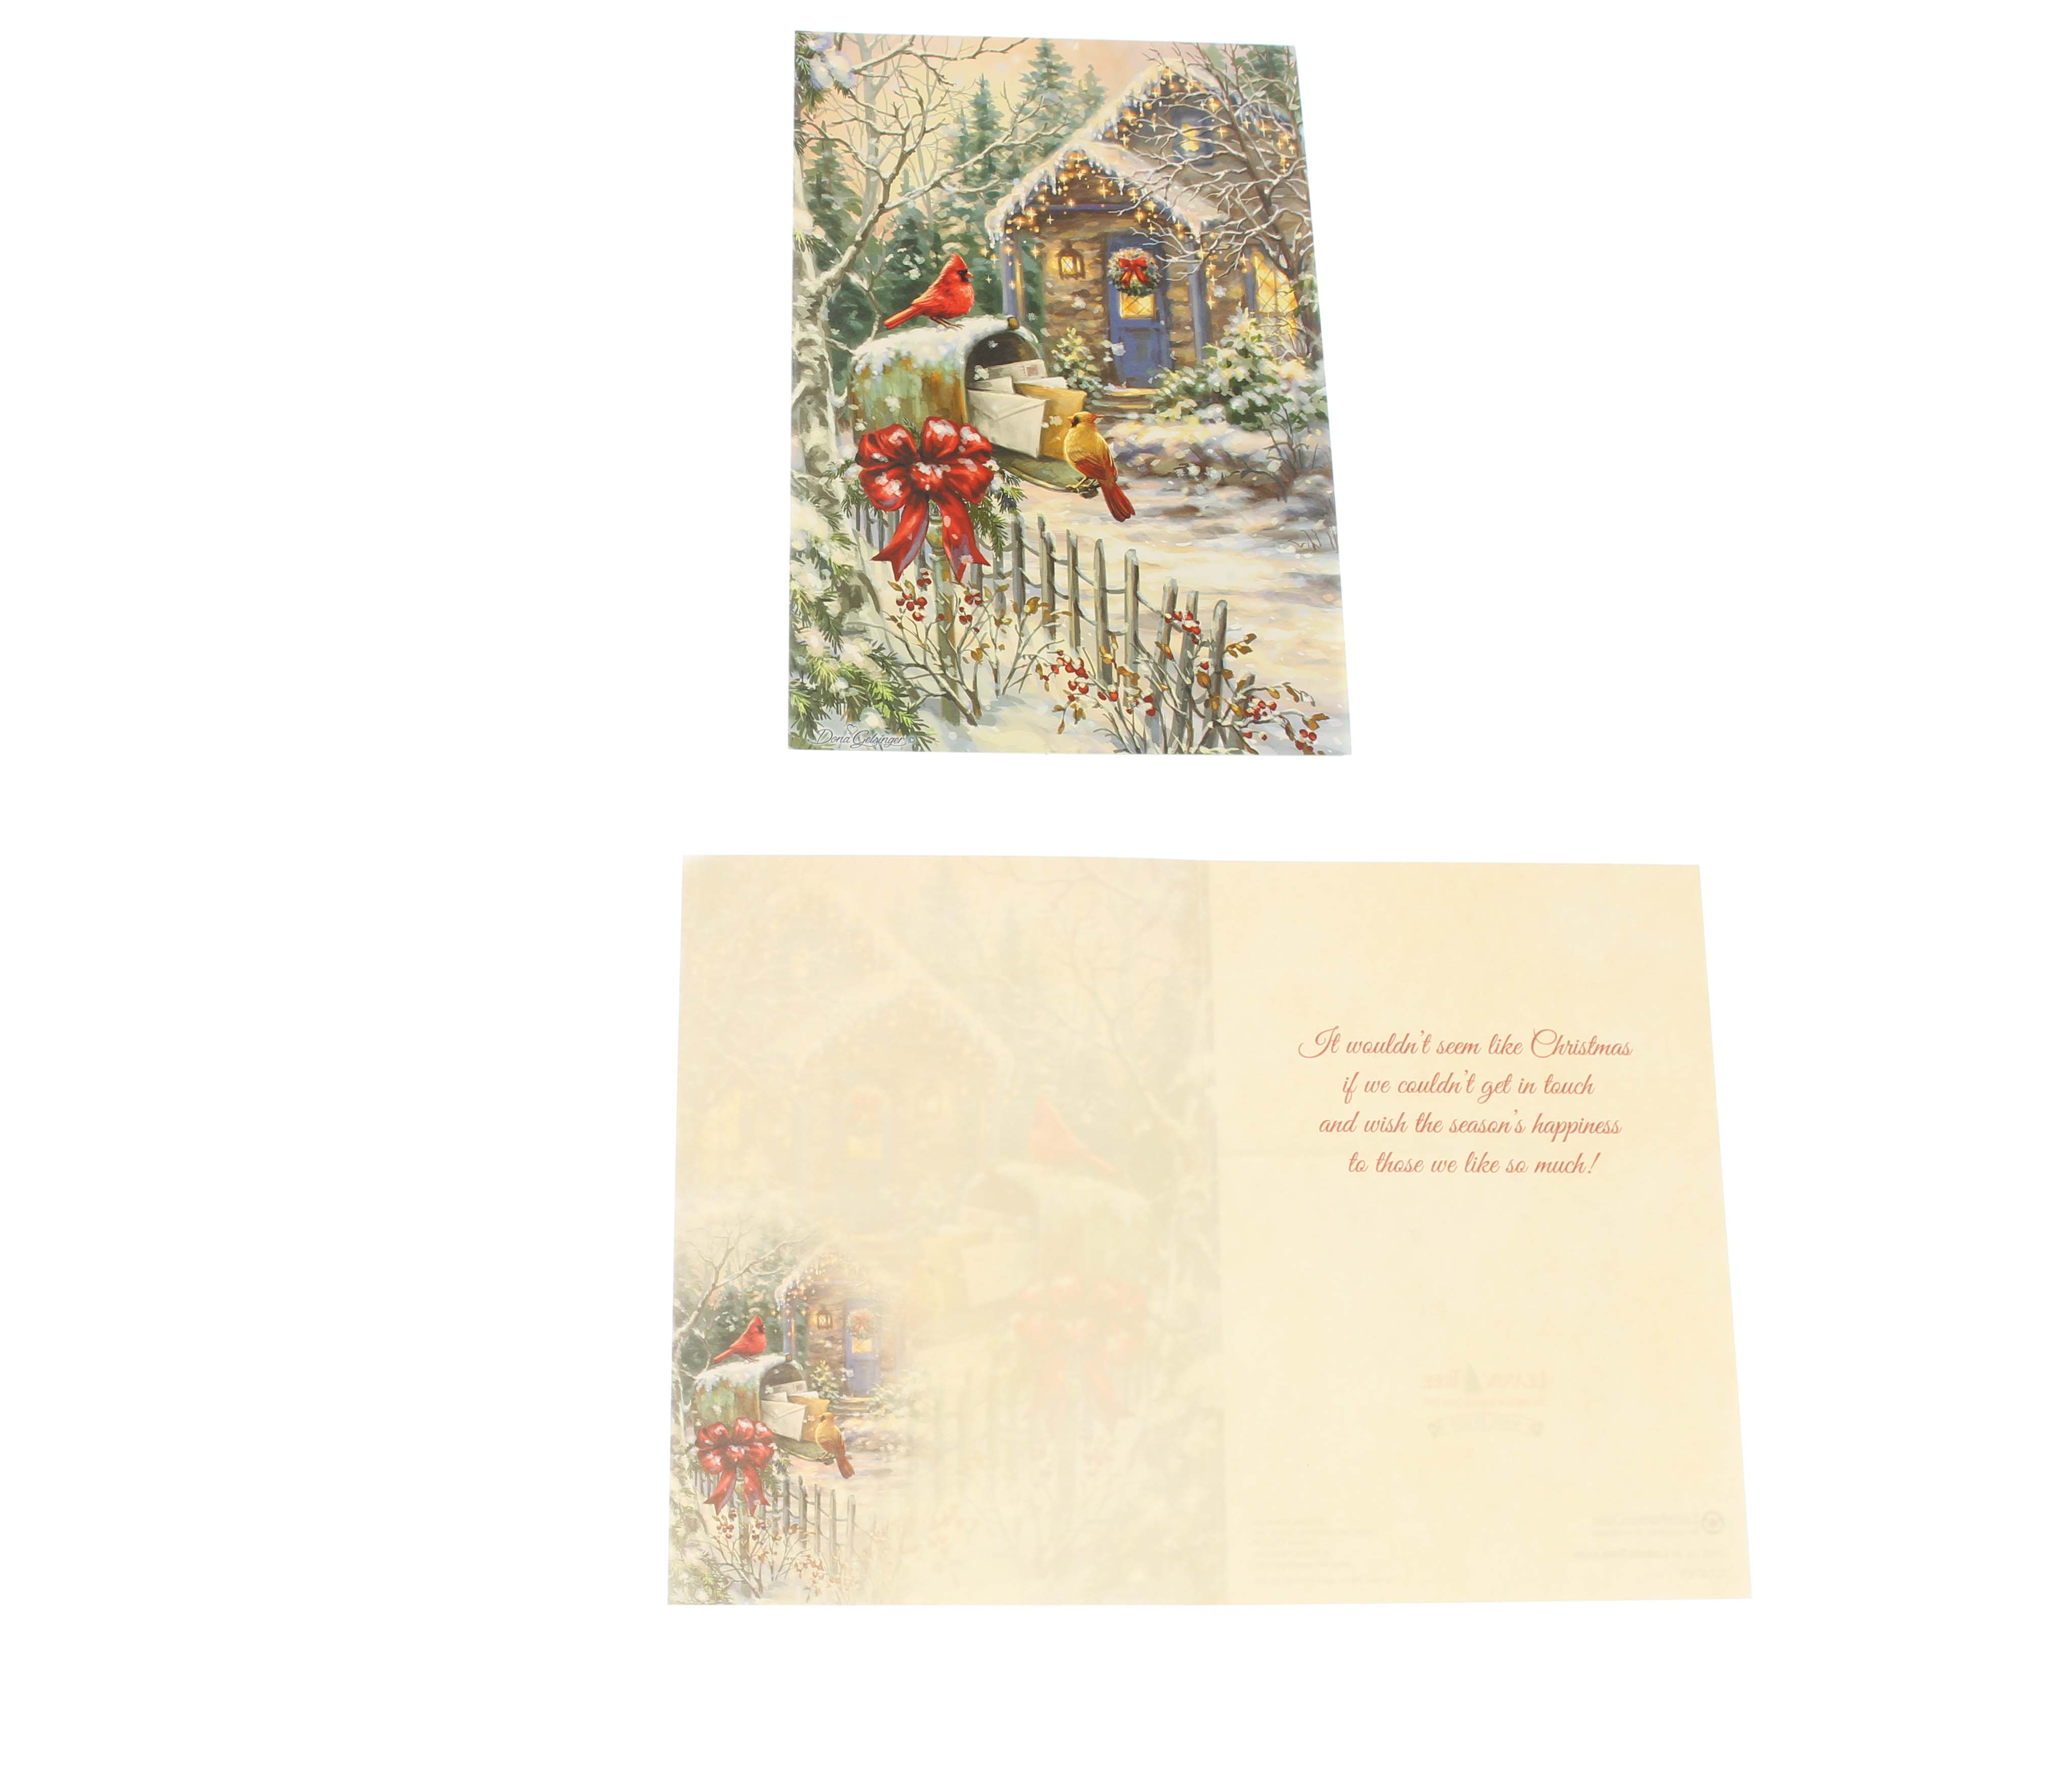 Christmas Cards, Boxed Assortment, 20 Cards/22 Envelopes, by Dona Gelsinger